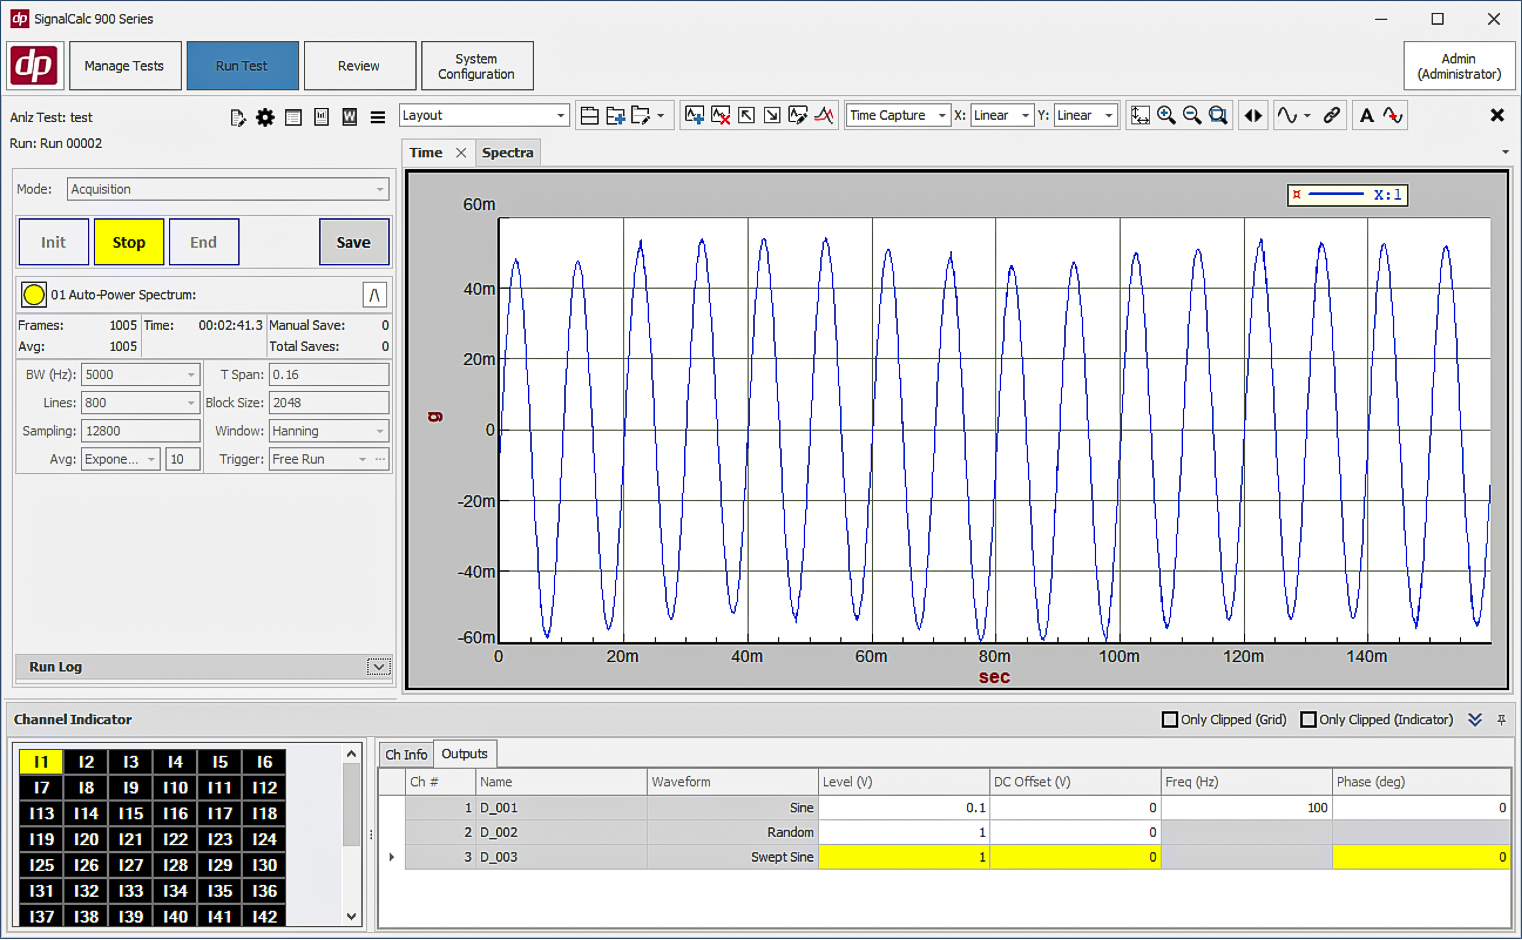 The ability to change the parameters of an output signal (e.g., a generated sine wave) live during the test has been added to SignalCalc 900